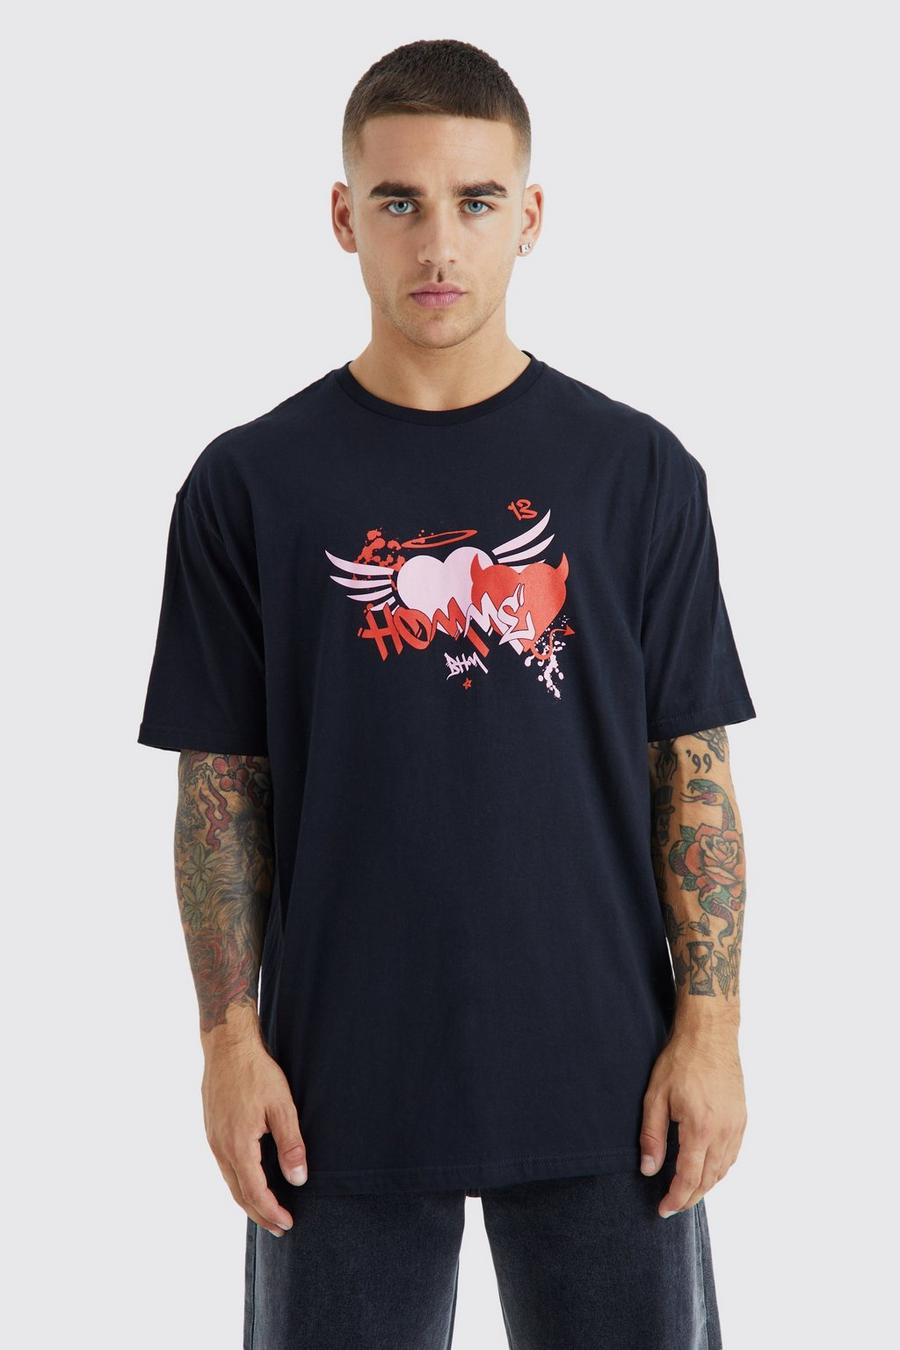 T-shirt Homme con grafica di cuore, Black image number 1